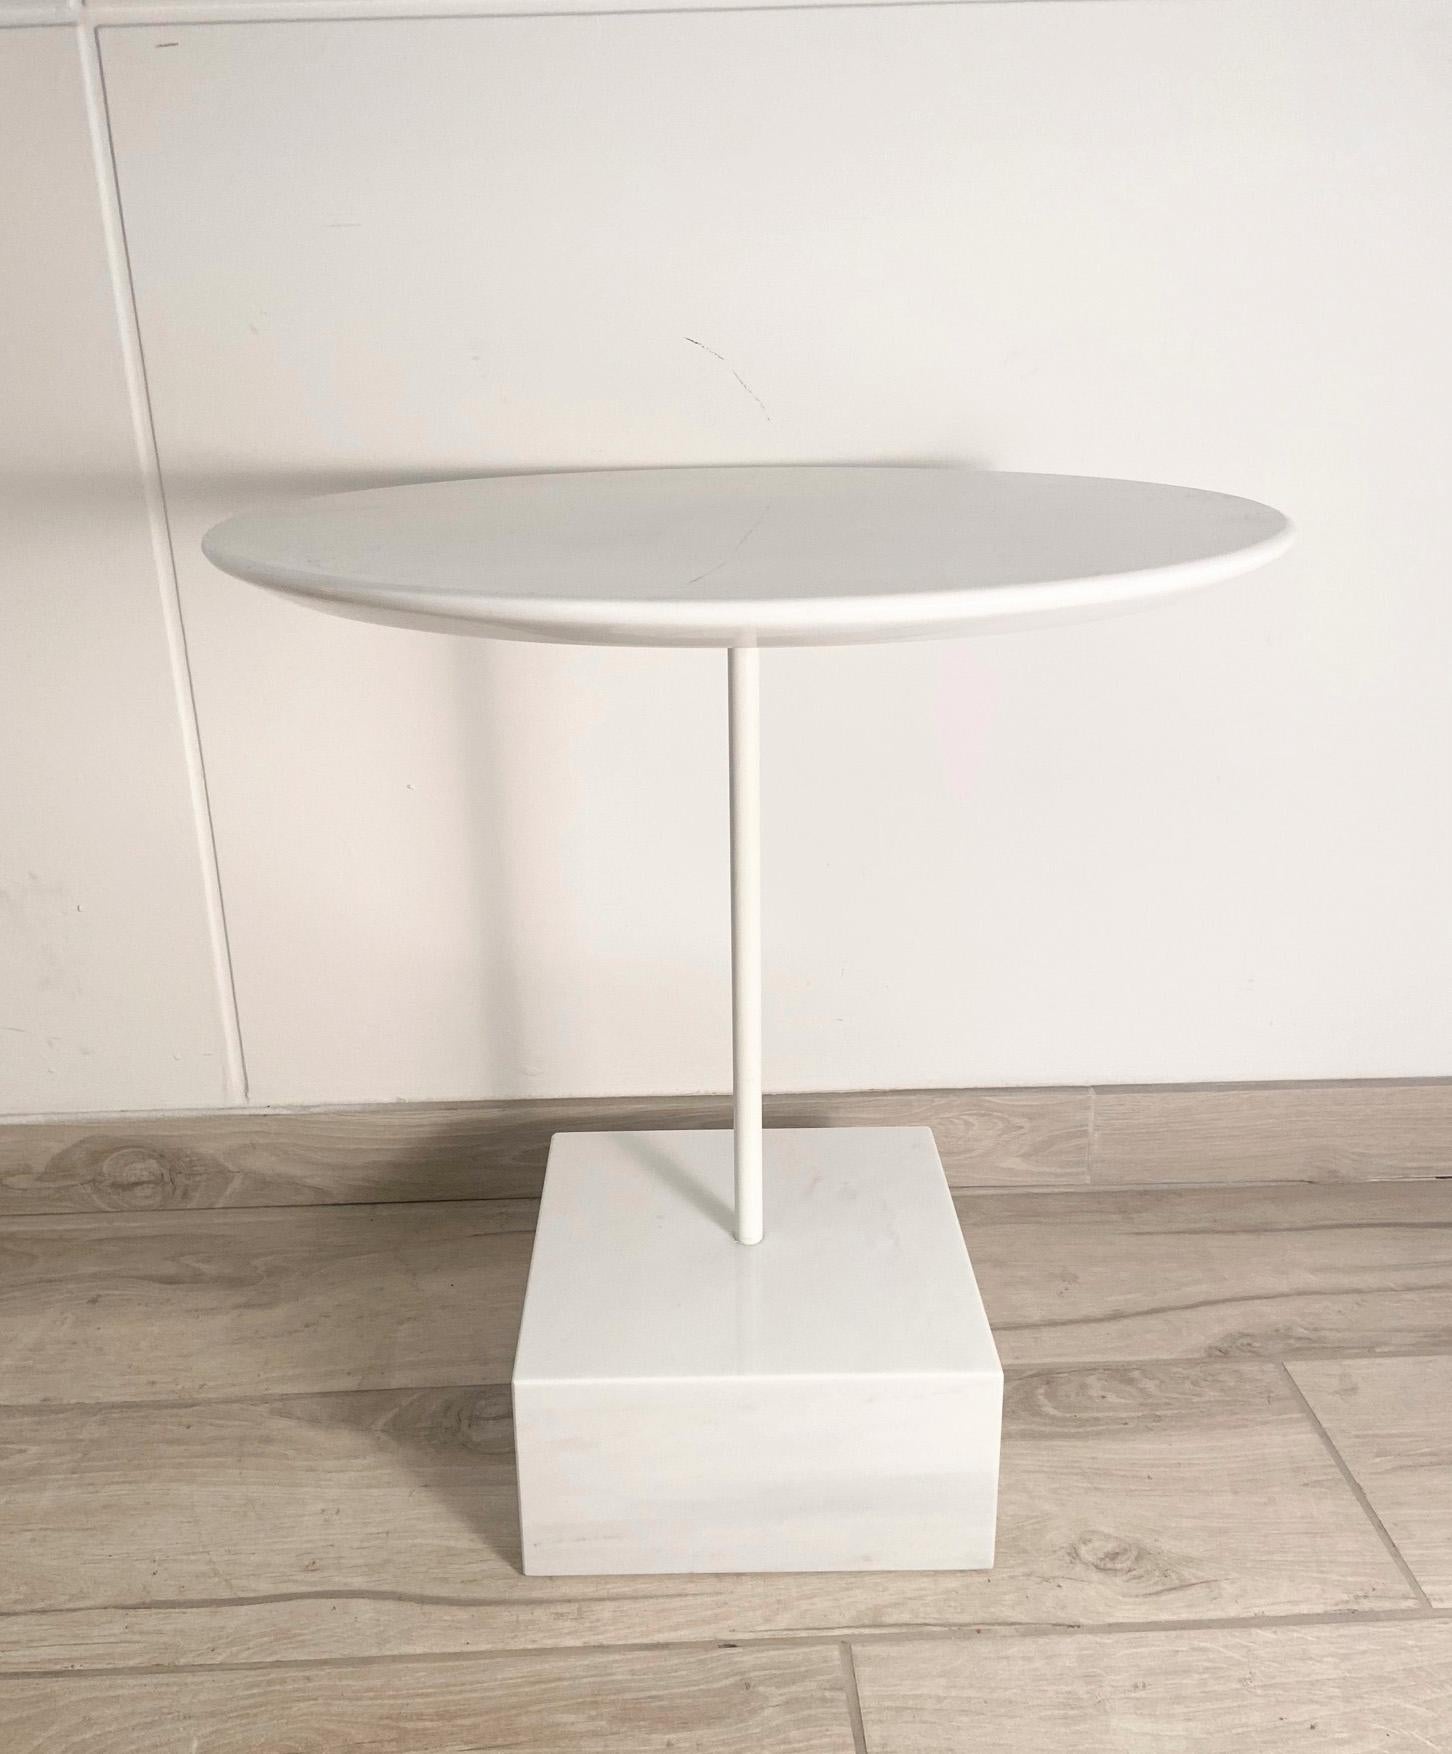 Primavera coffee table model in white marble, designed by Ettore Sottsass.